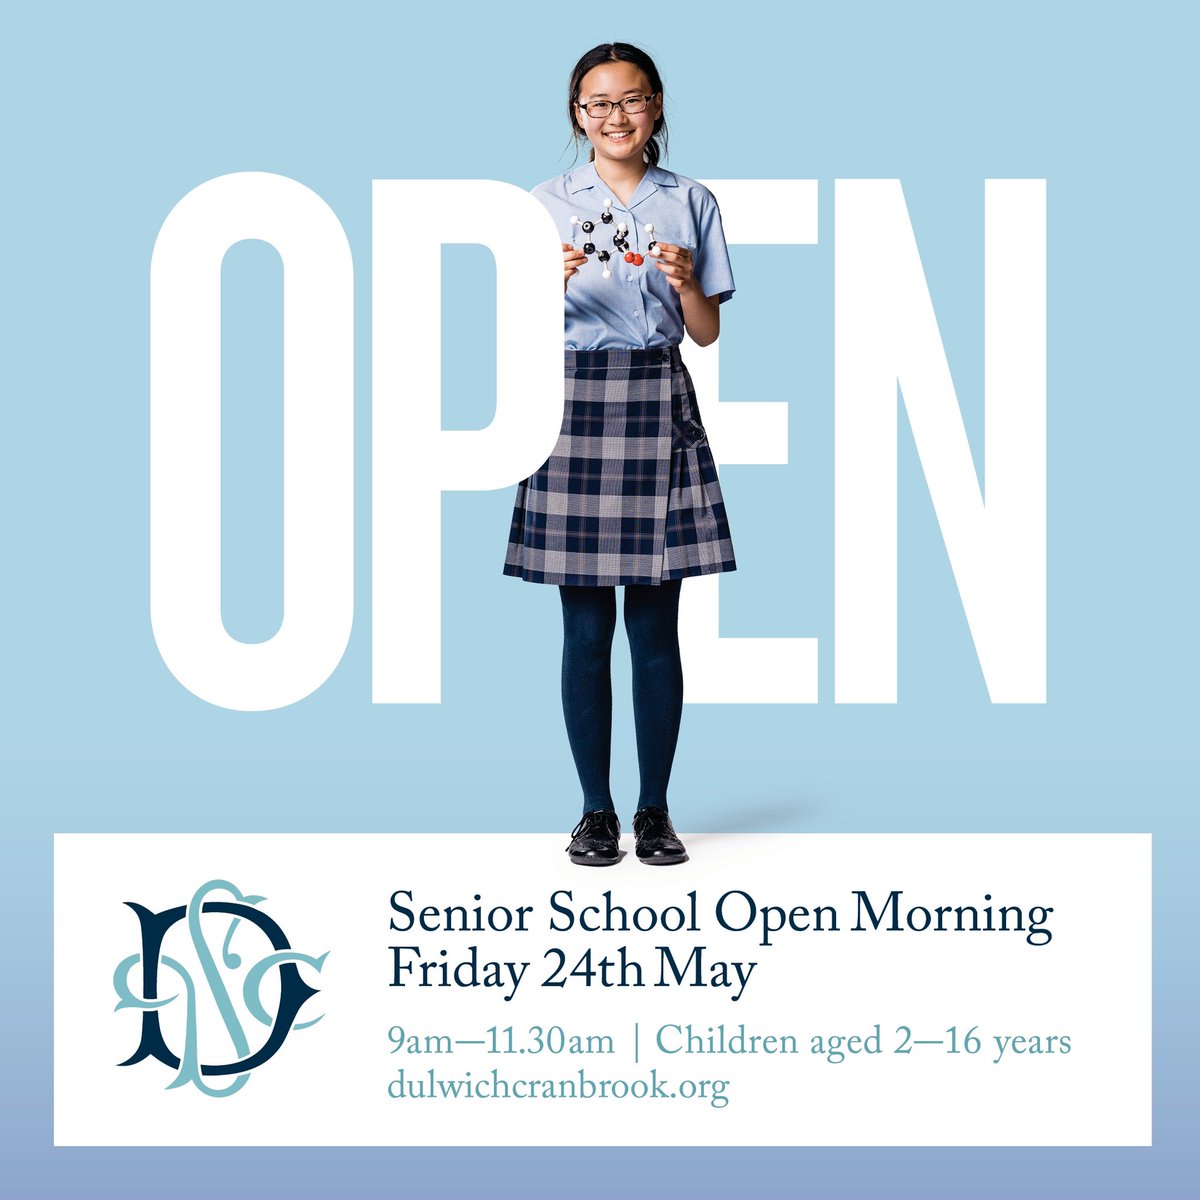 We’d love to show you what makes Dulwich Cranbrook so special. Please join us for our Senior School Open Morning on Friday 24th May. Please sign up via our website or email admissions@dulwichcranbrook.org. 

#SeniorSchool #OpenMorning #DulwichCranbrook